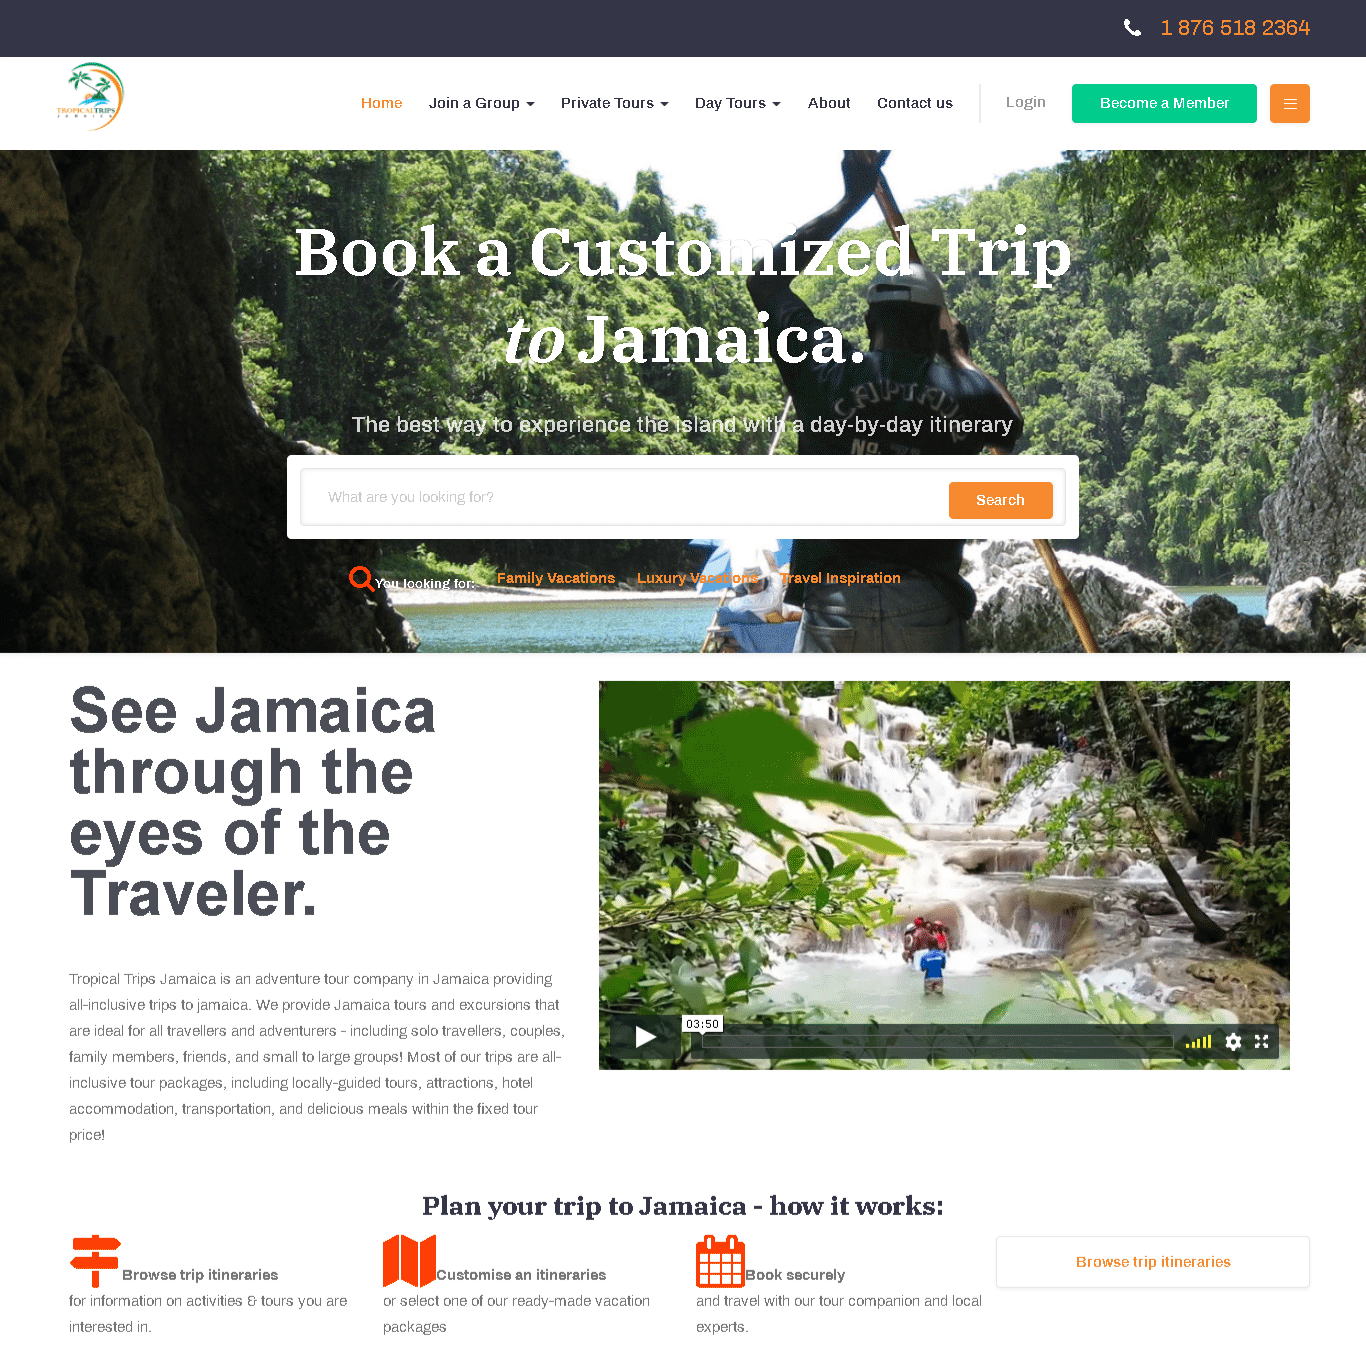 Client Projects - Tropical Trips Jamaica